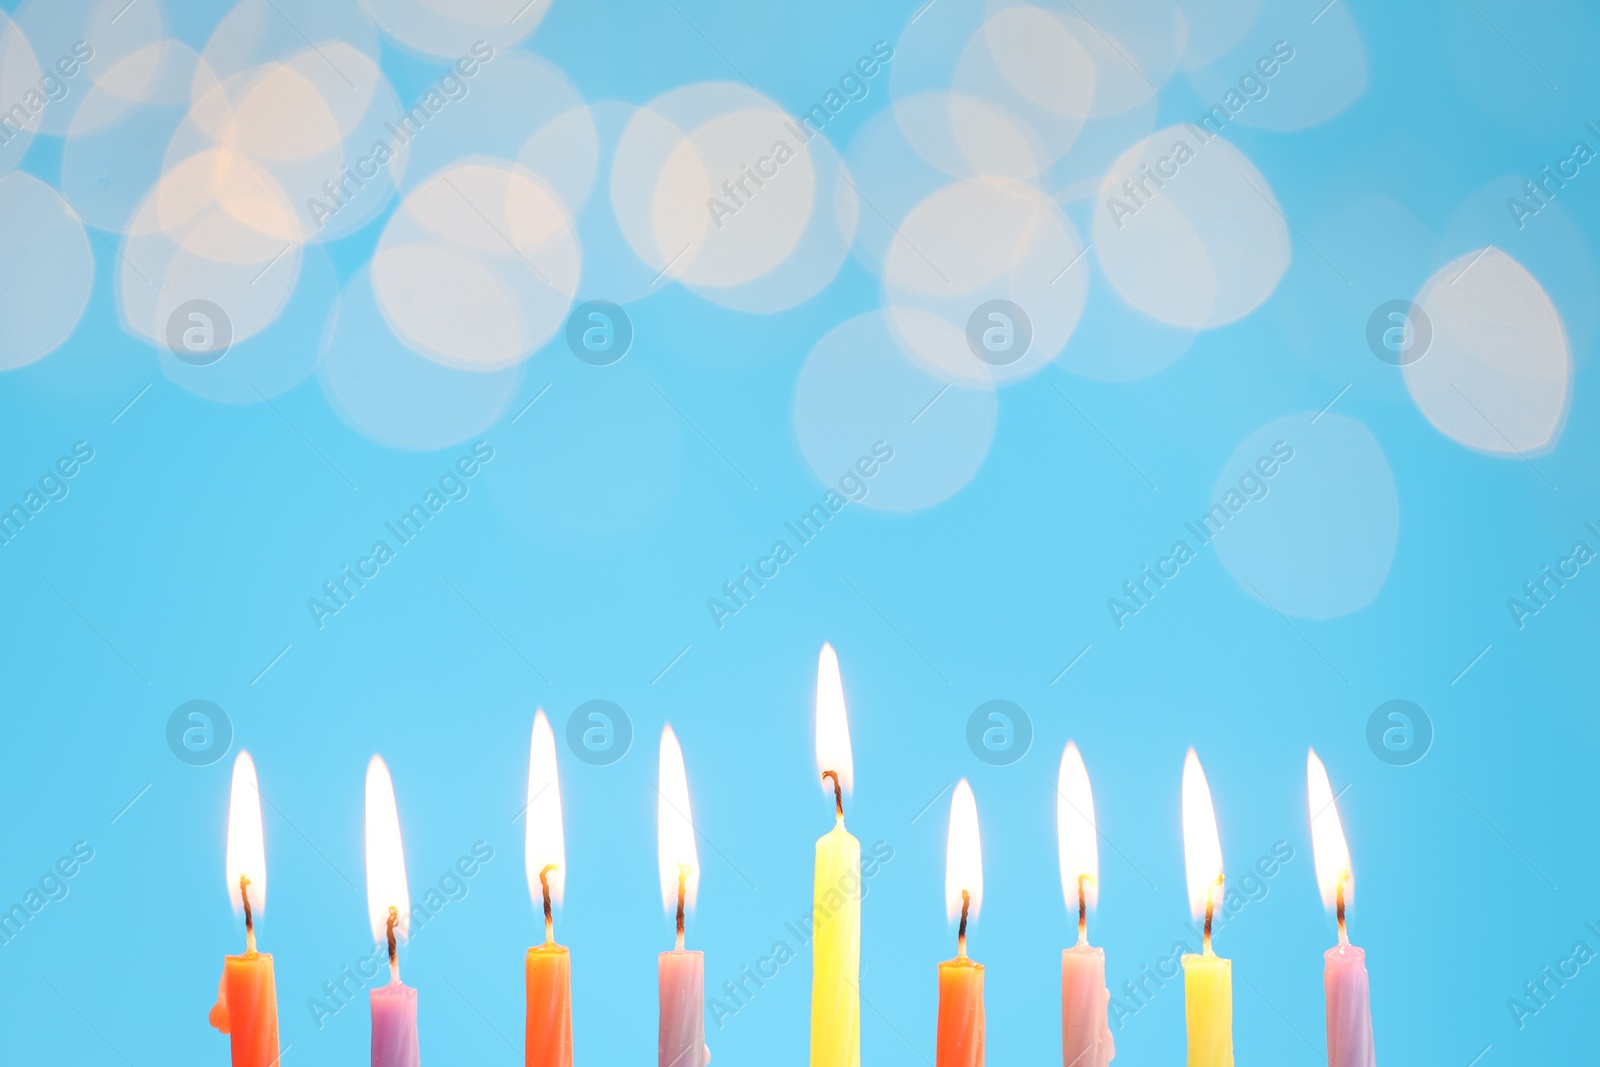 Photo of Hanukkah celebration. Burning candles on light blue background with blurred lights, space for text